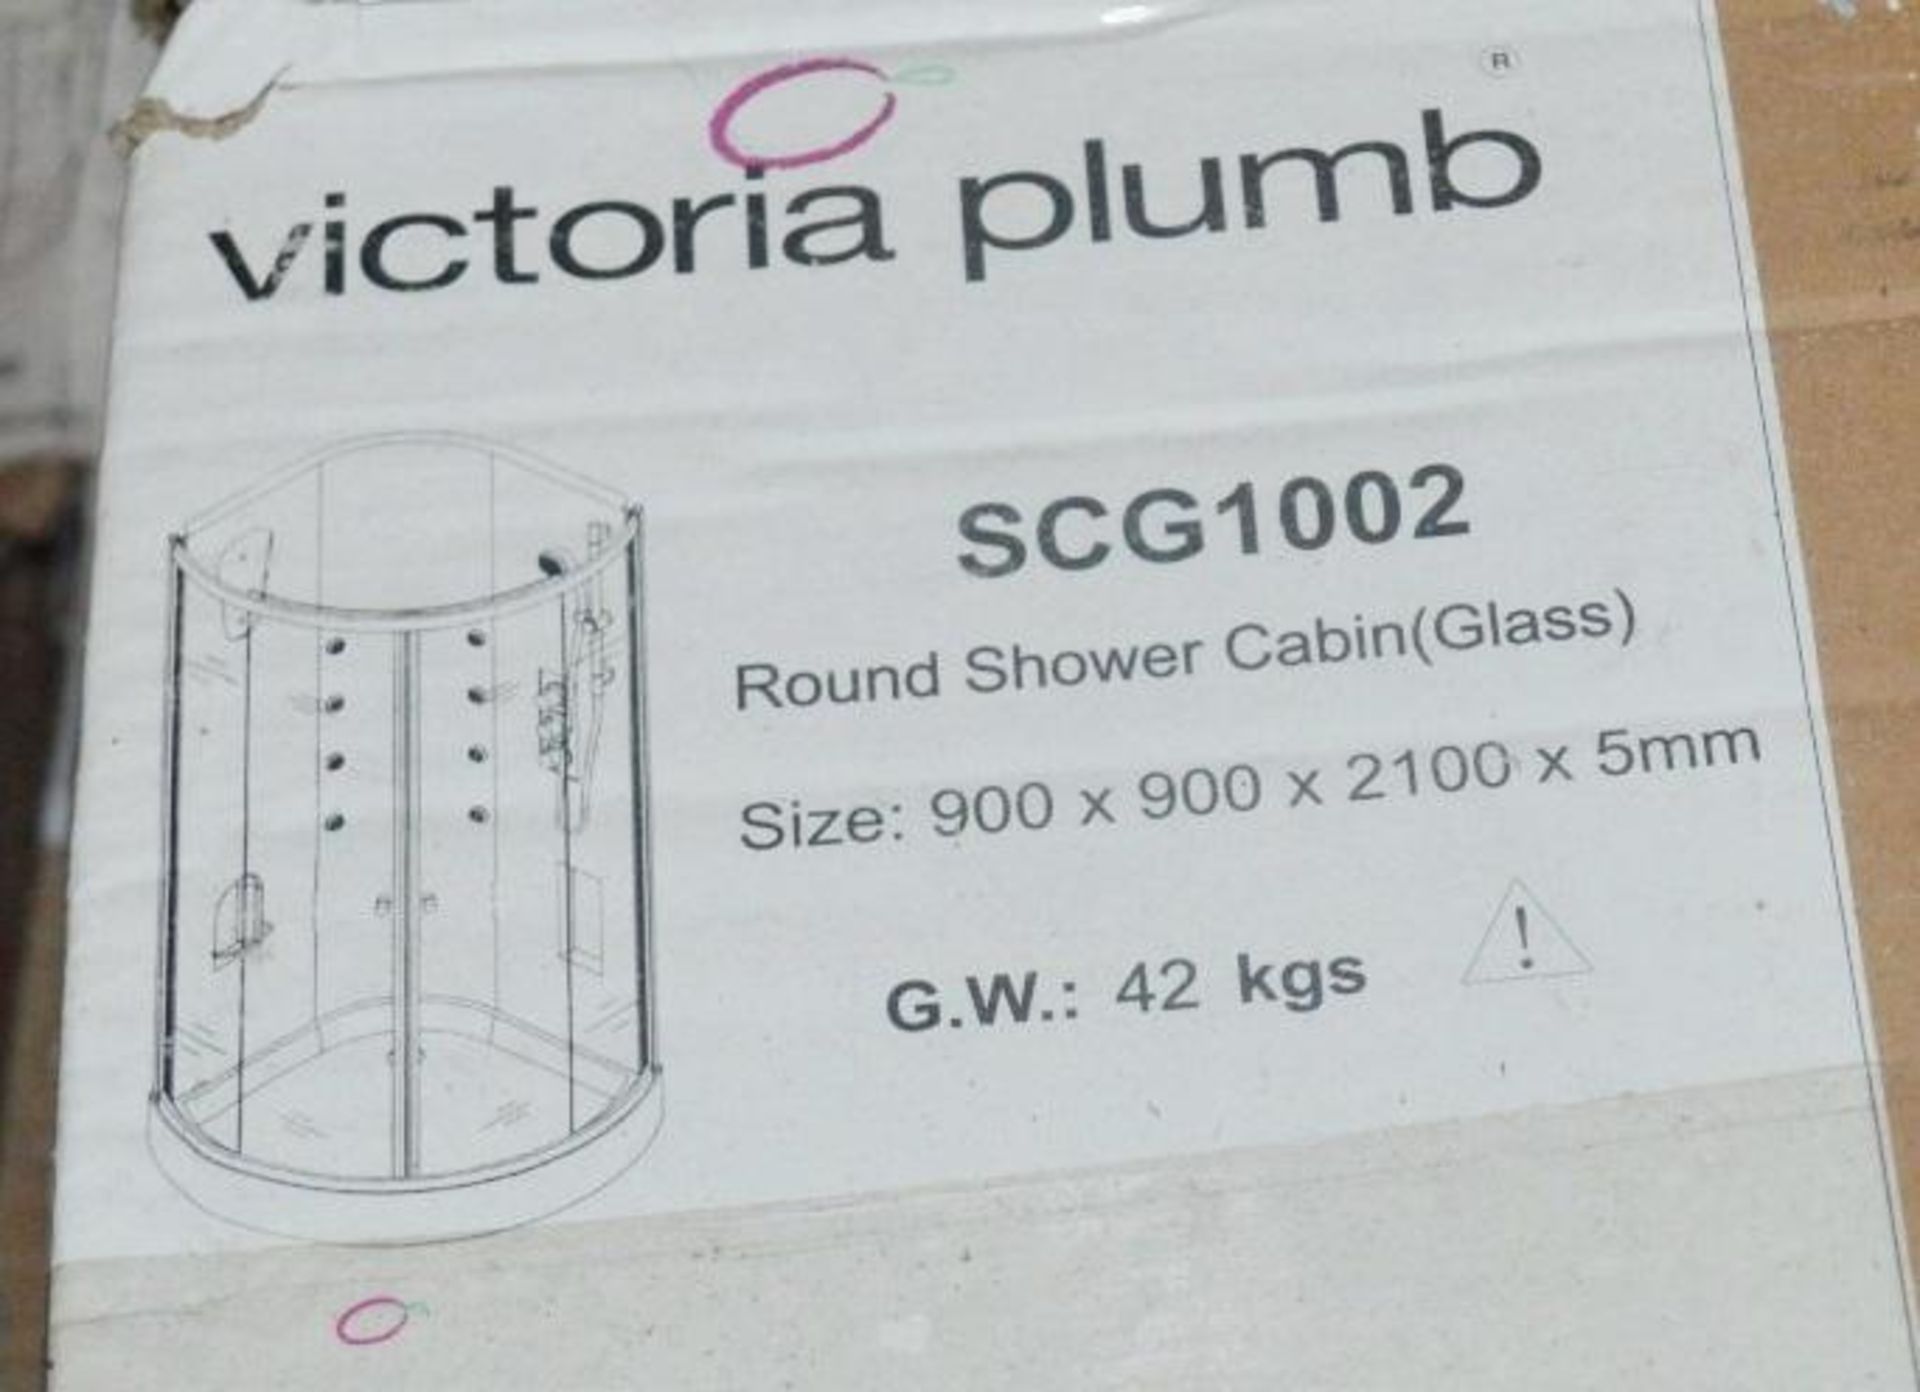 11 x Assorted Shower Screens And Panels - Ref 226 / Ref 641 - New / Unused Boxed Stock - CL269 - Loc - Image 7 of 8